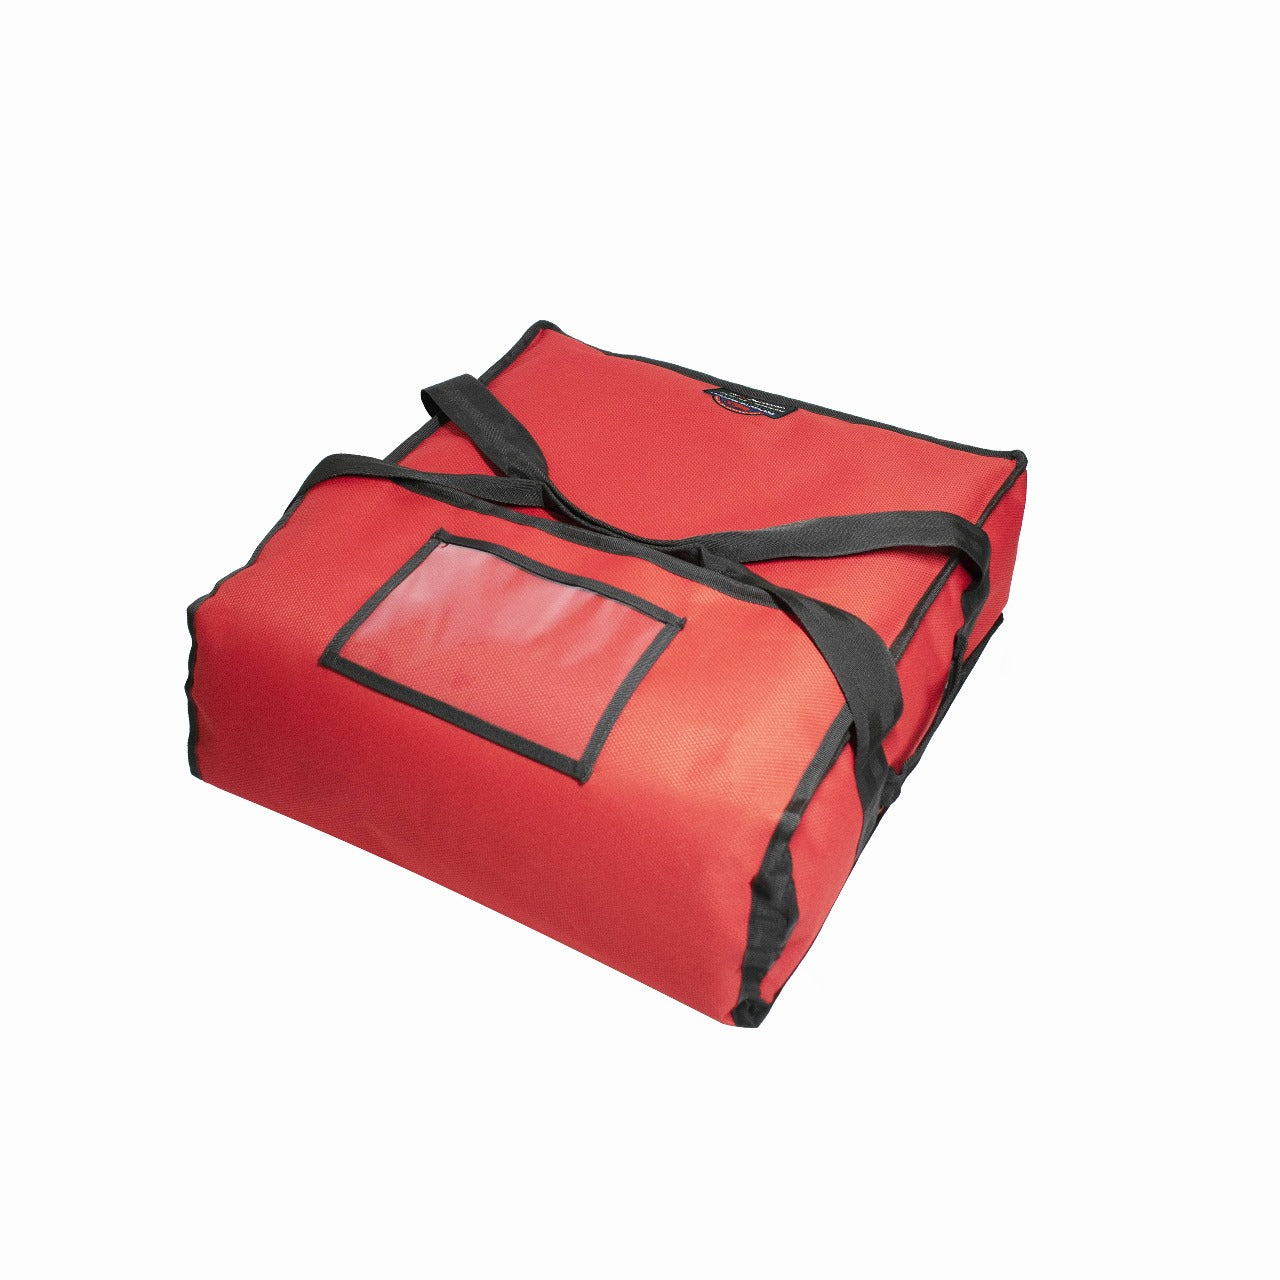 PB22-1618-RED 16" - 18" Pizza Delivery Bag (Red) UPC: 850024511057